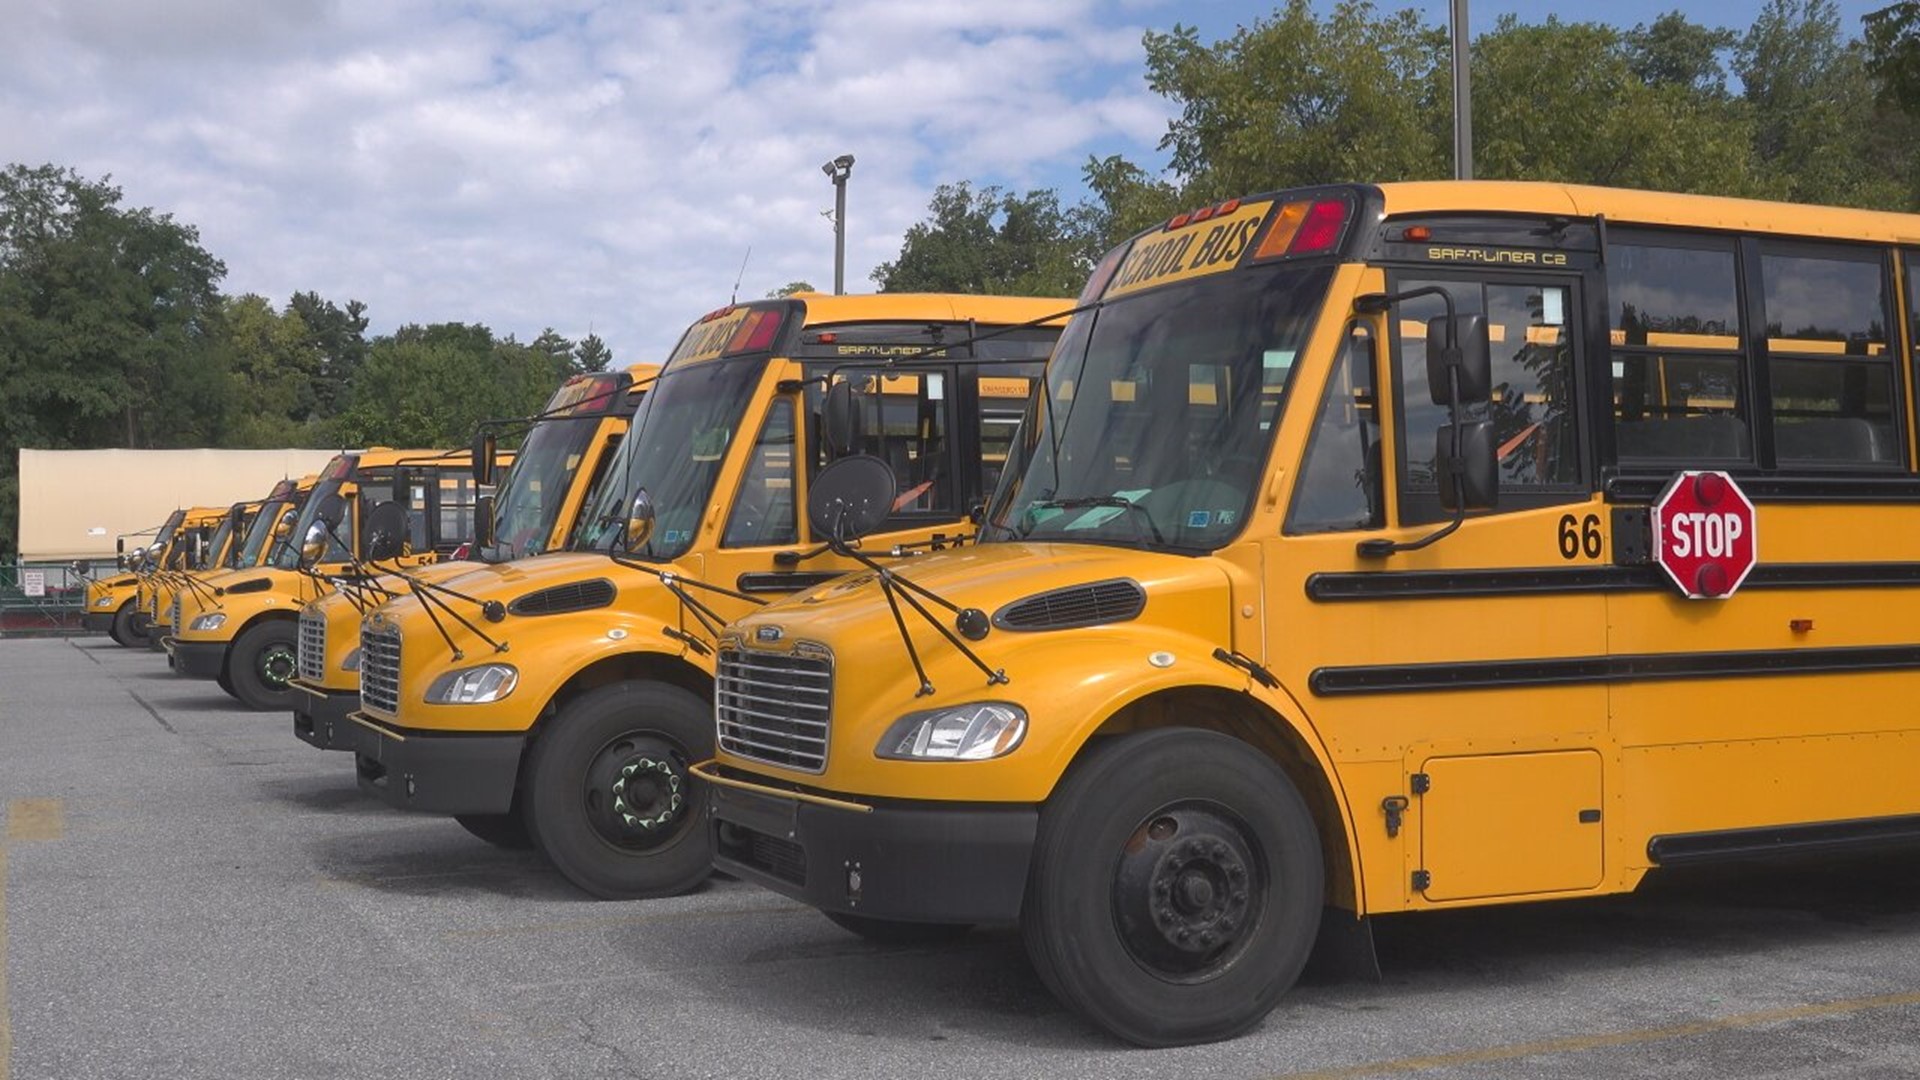 Red Land High School, Cedar Cliff High School and Crossroads Middle School alternate remote learning days as the search for more bus drivers continues.